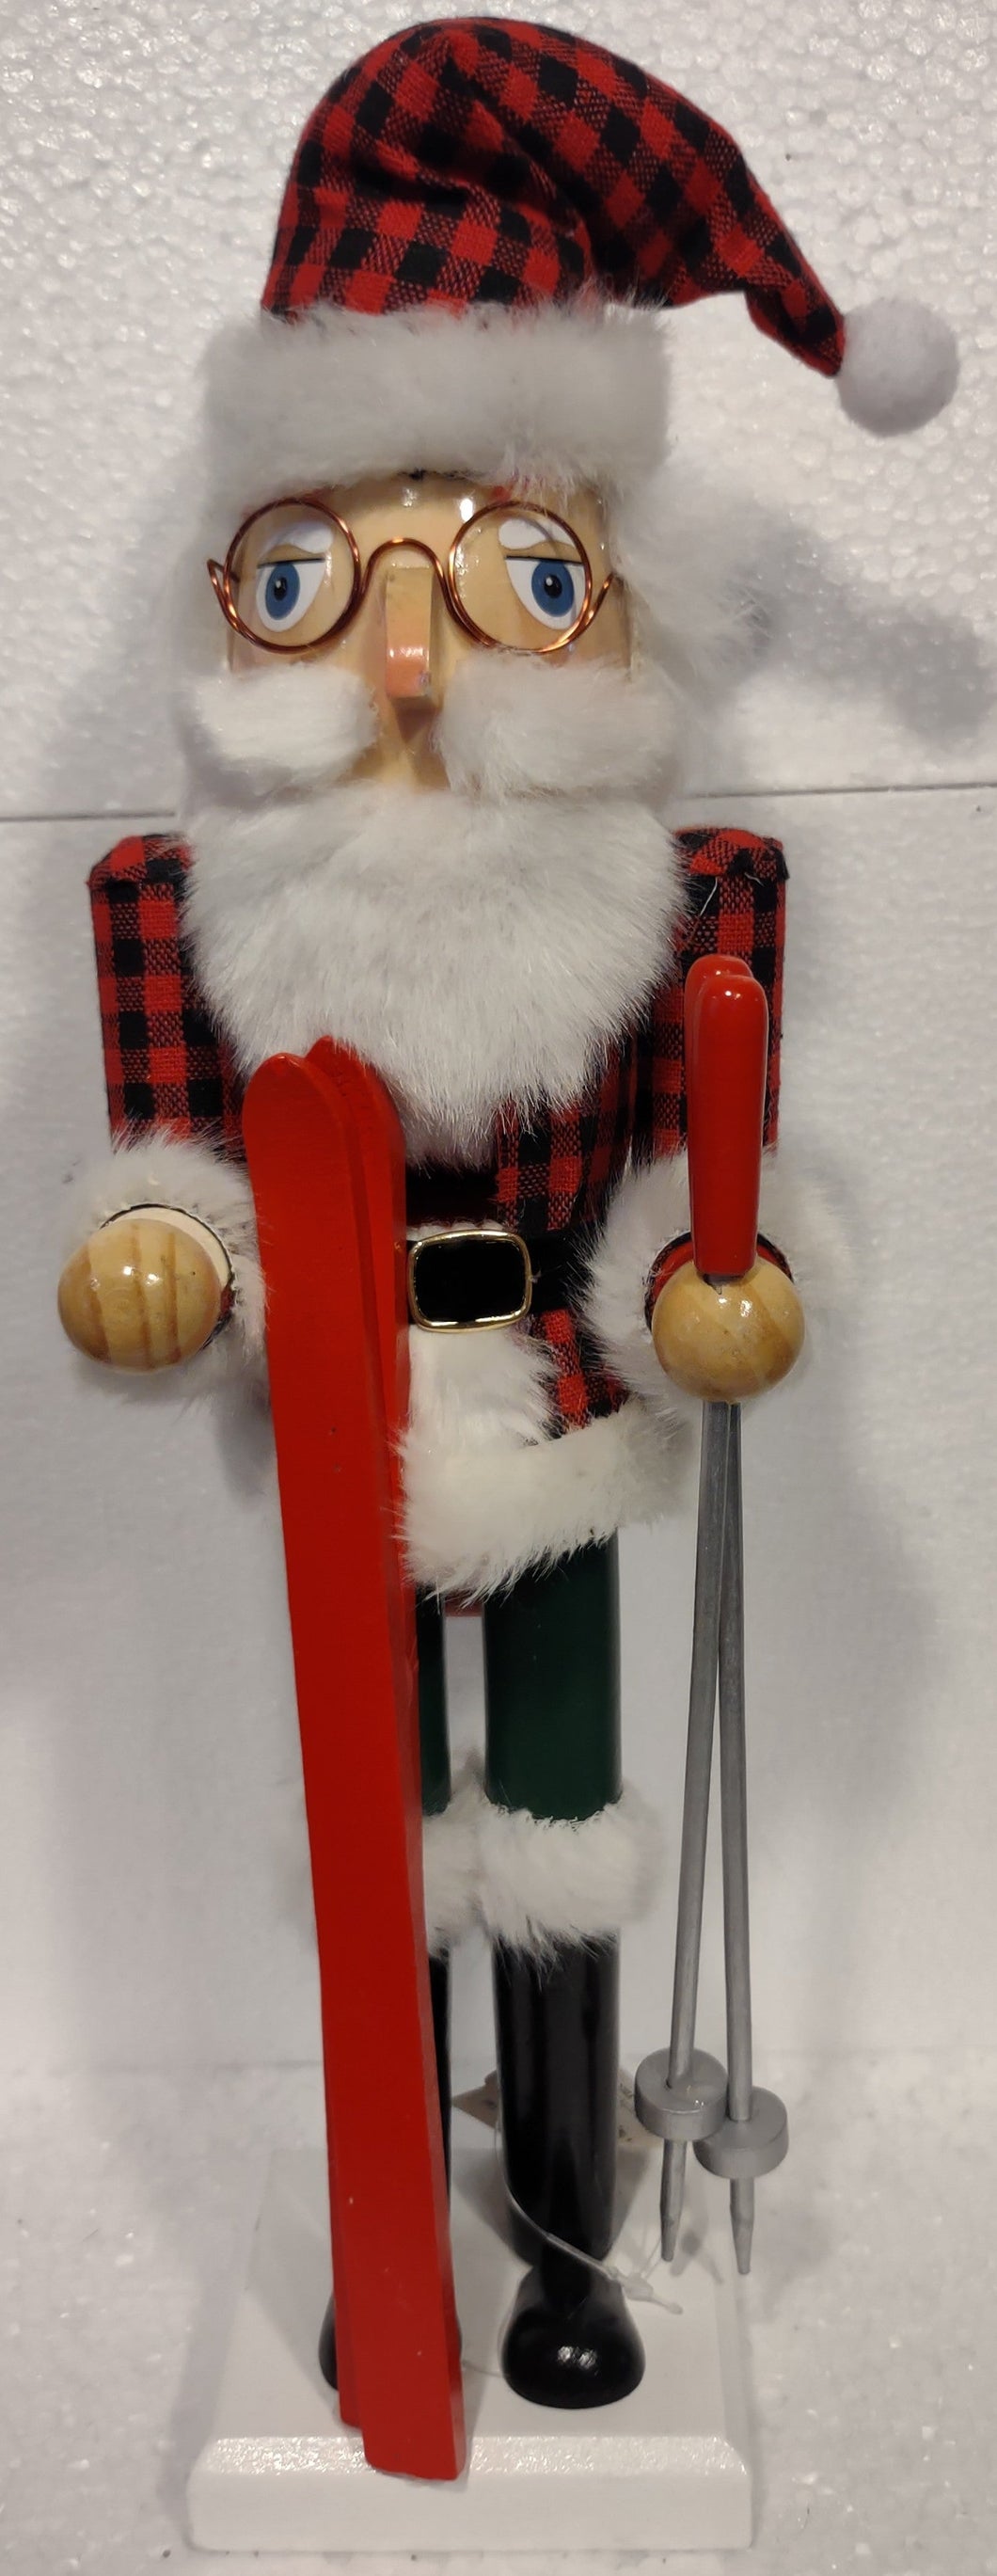 Wooden Santa Nutcracker with Red Spectacles & Skis 16